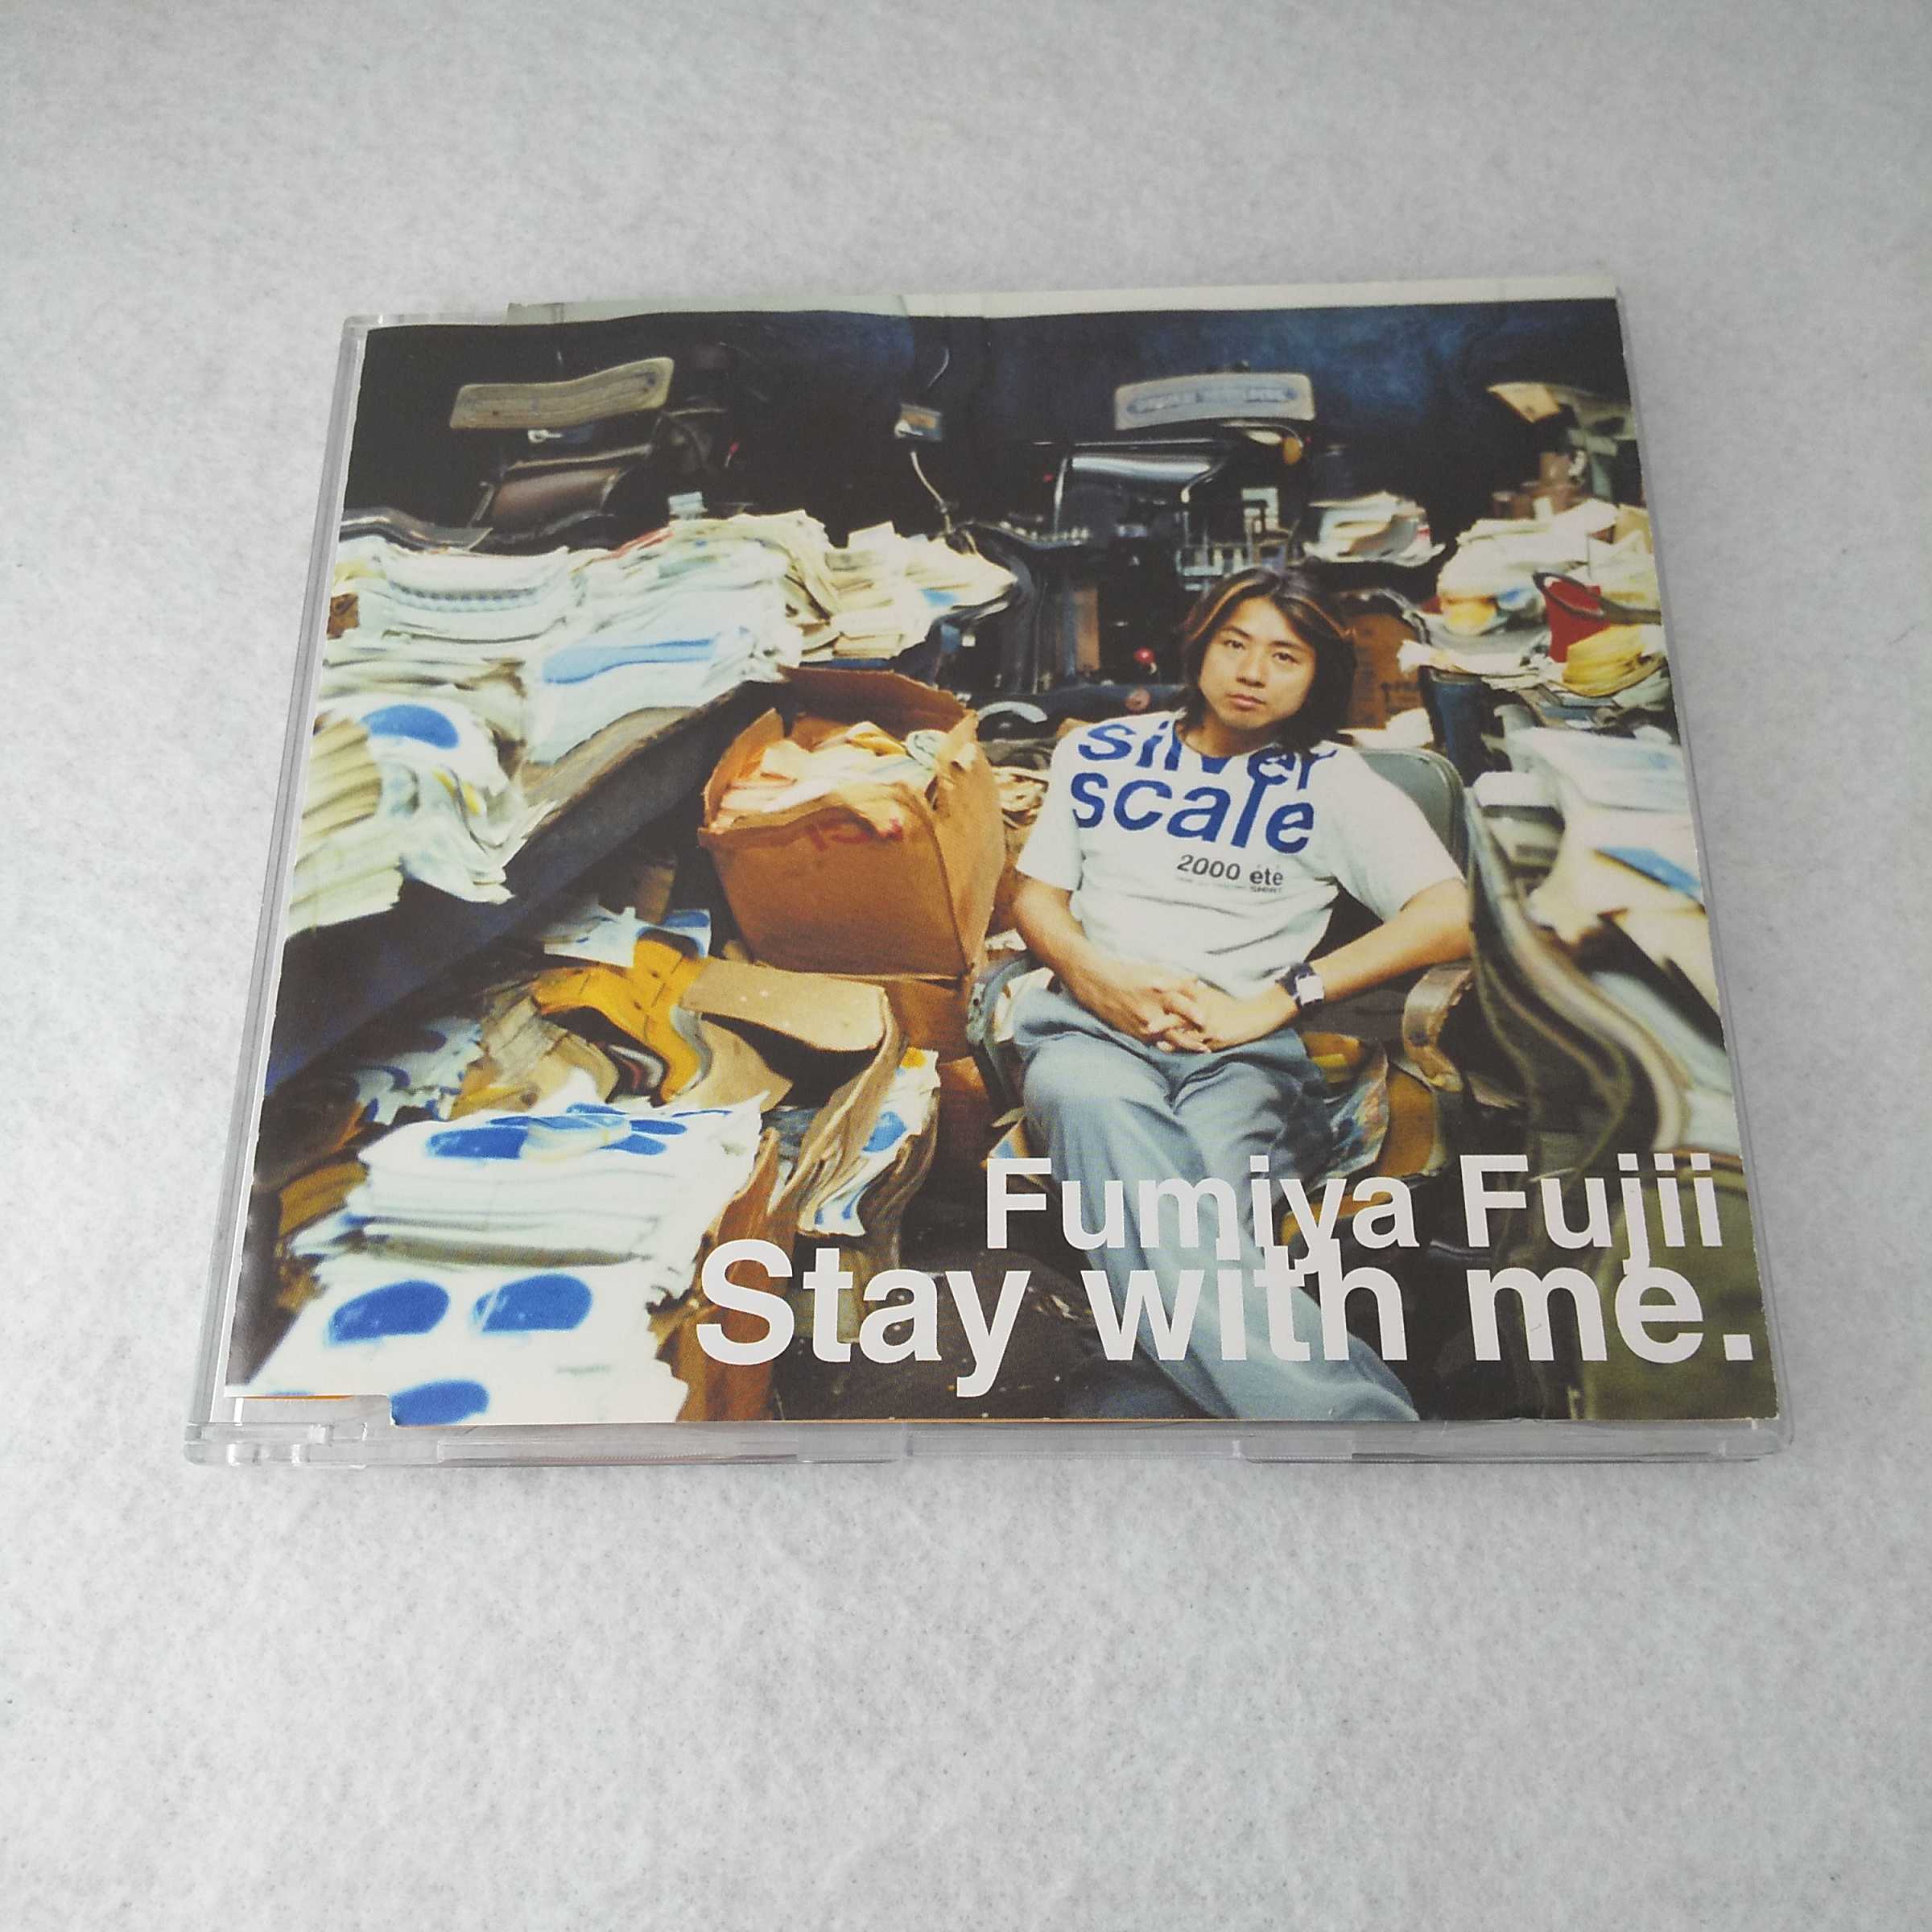 AC09271 【中古】 【CD】 Stay with me./藤井フミヤ